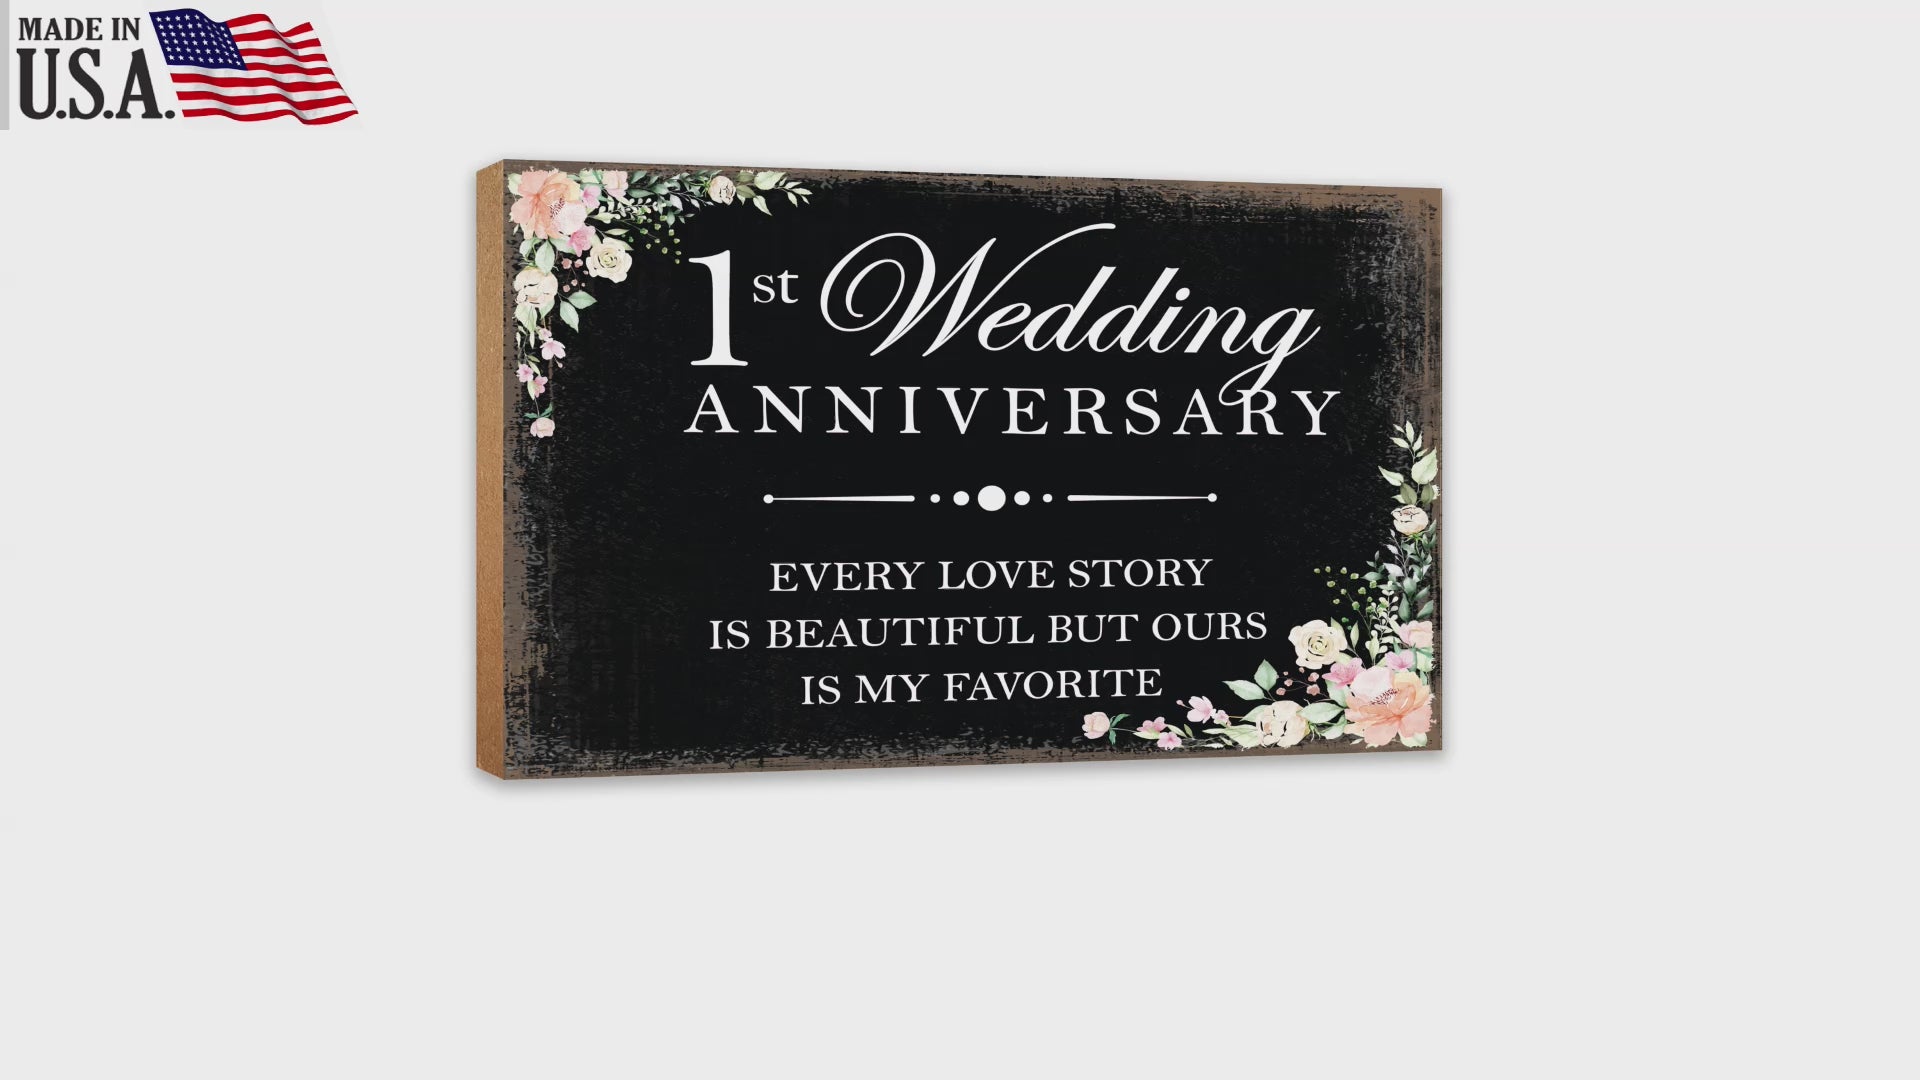 1st Wedding Anniversary Unique Shelf Decor and Tabletop Signs Gift for Couples - Every Love Story